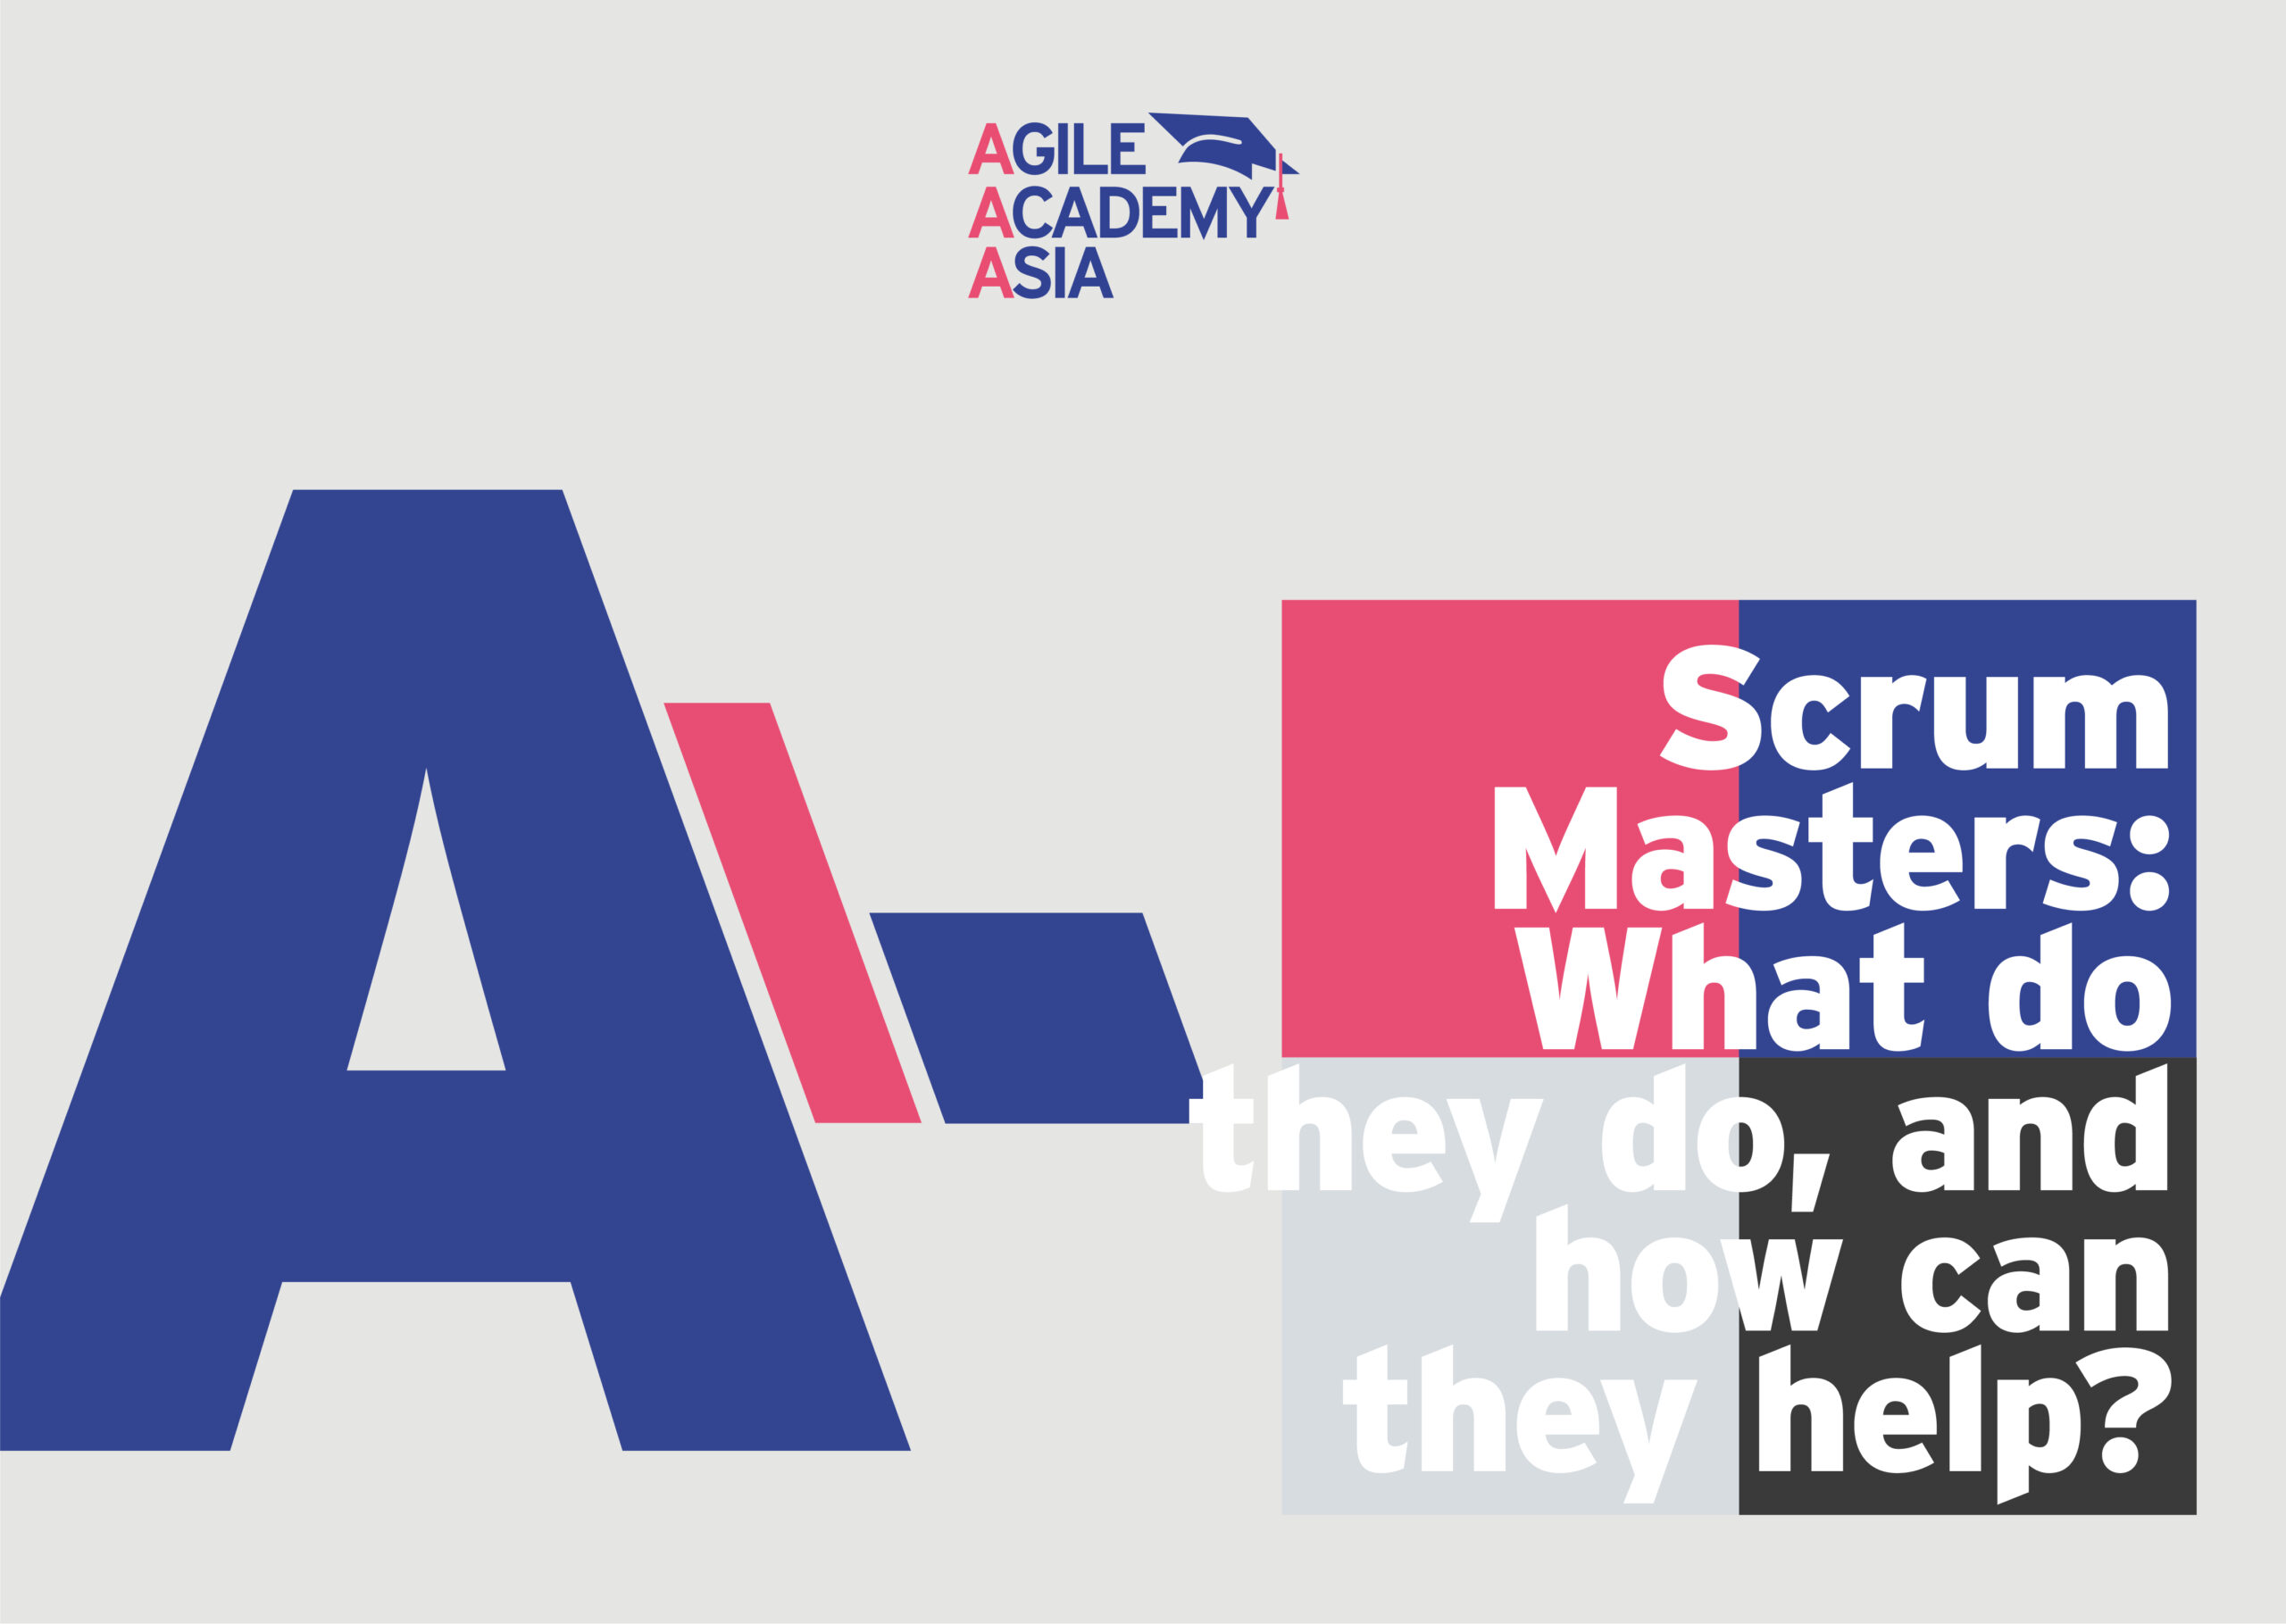 Scrum Masters: What do they do, and how can they help?